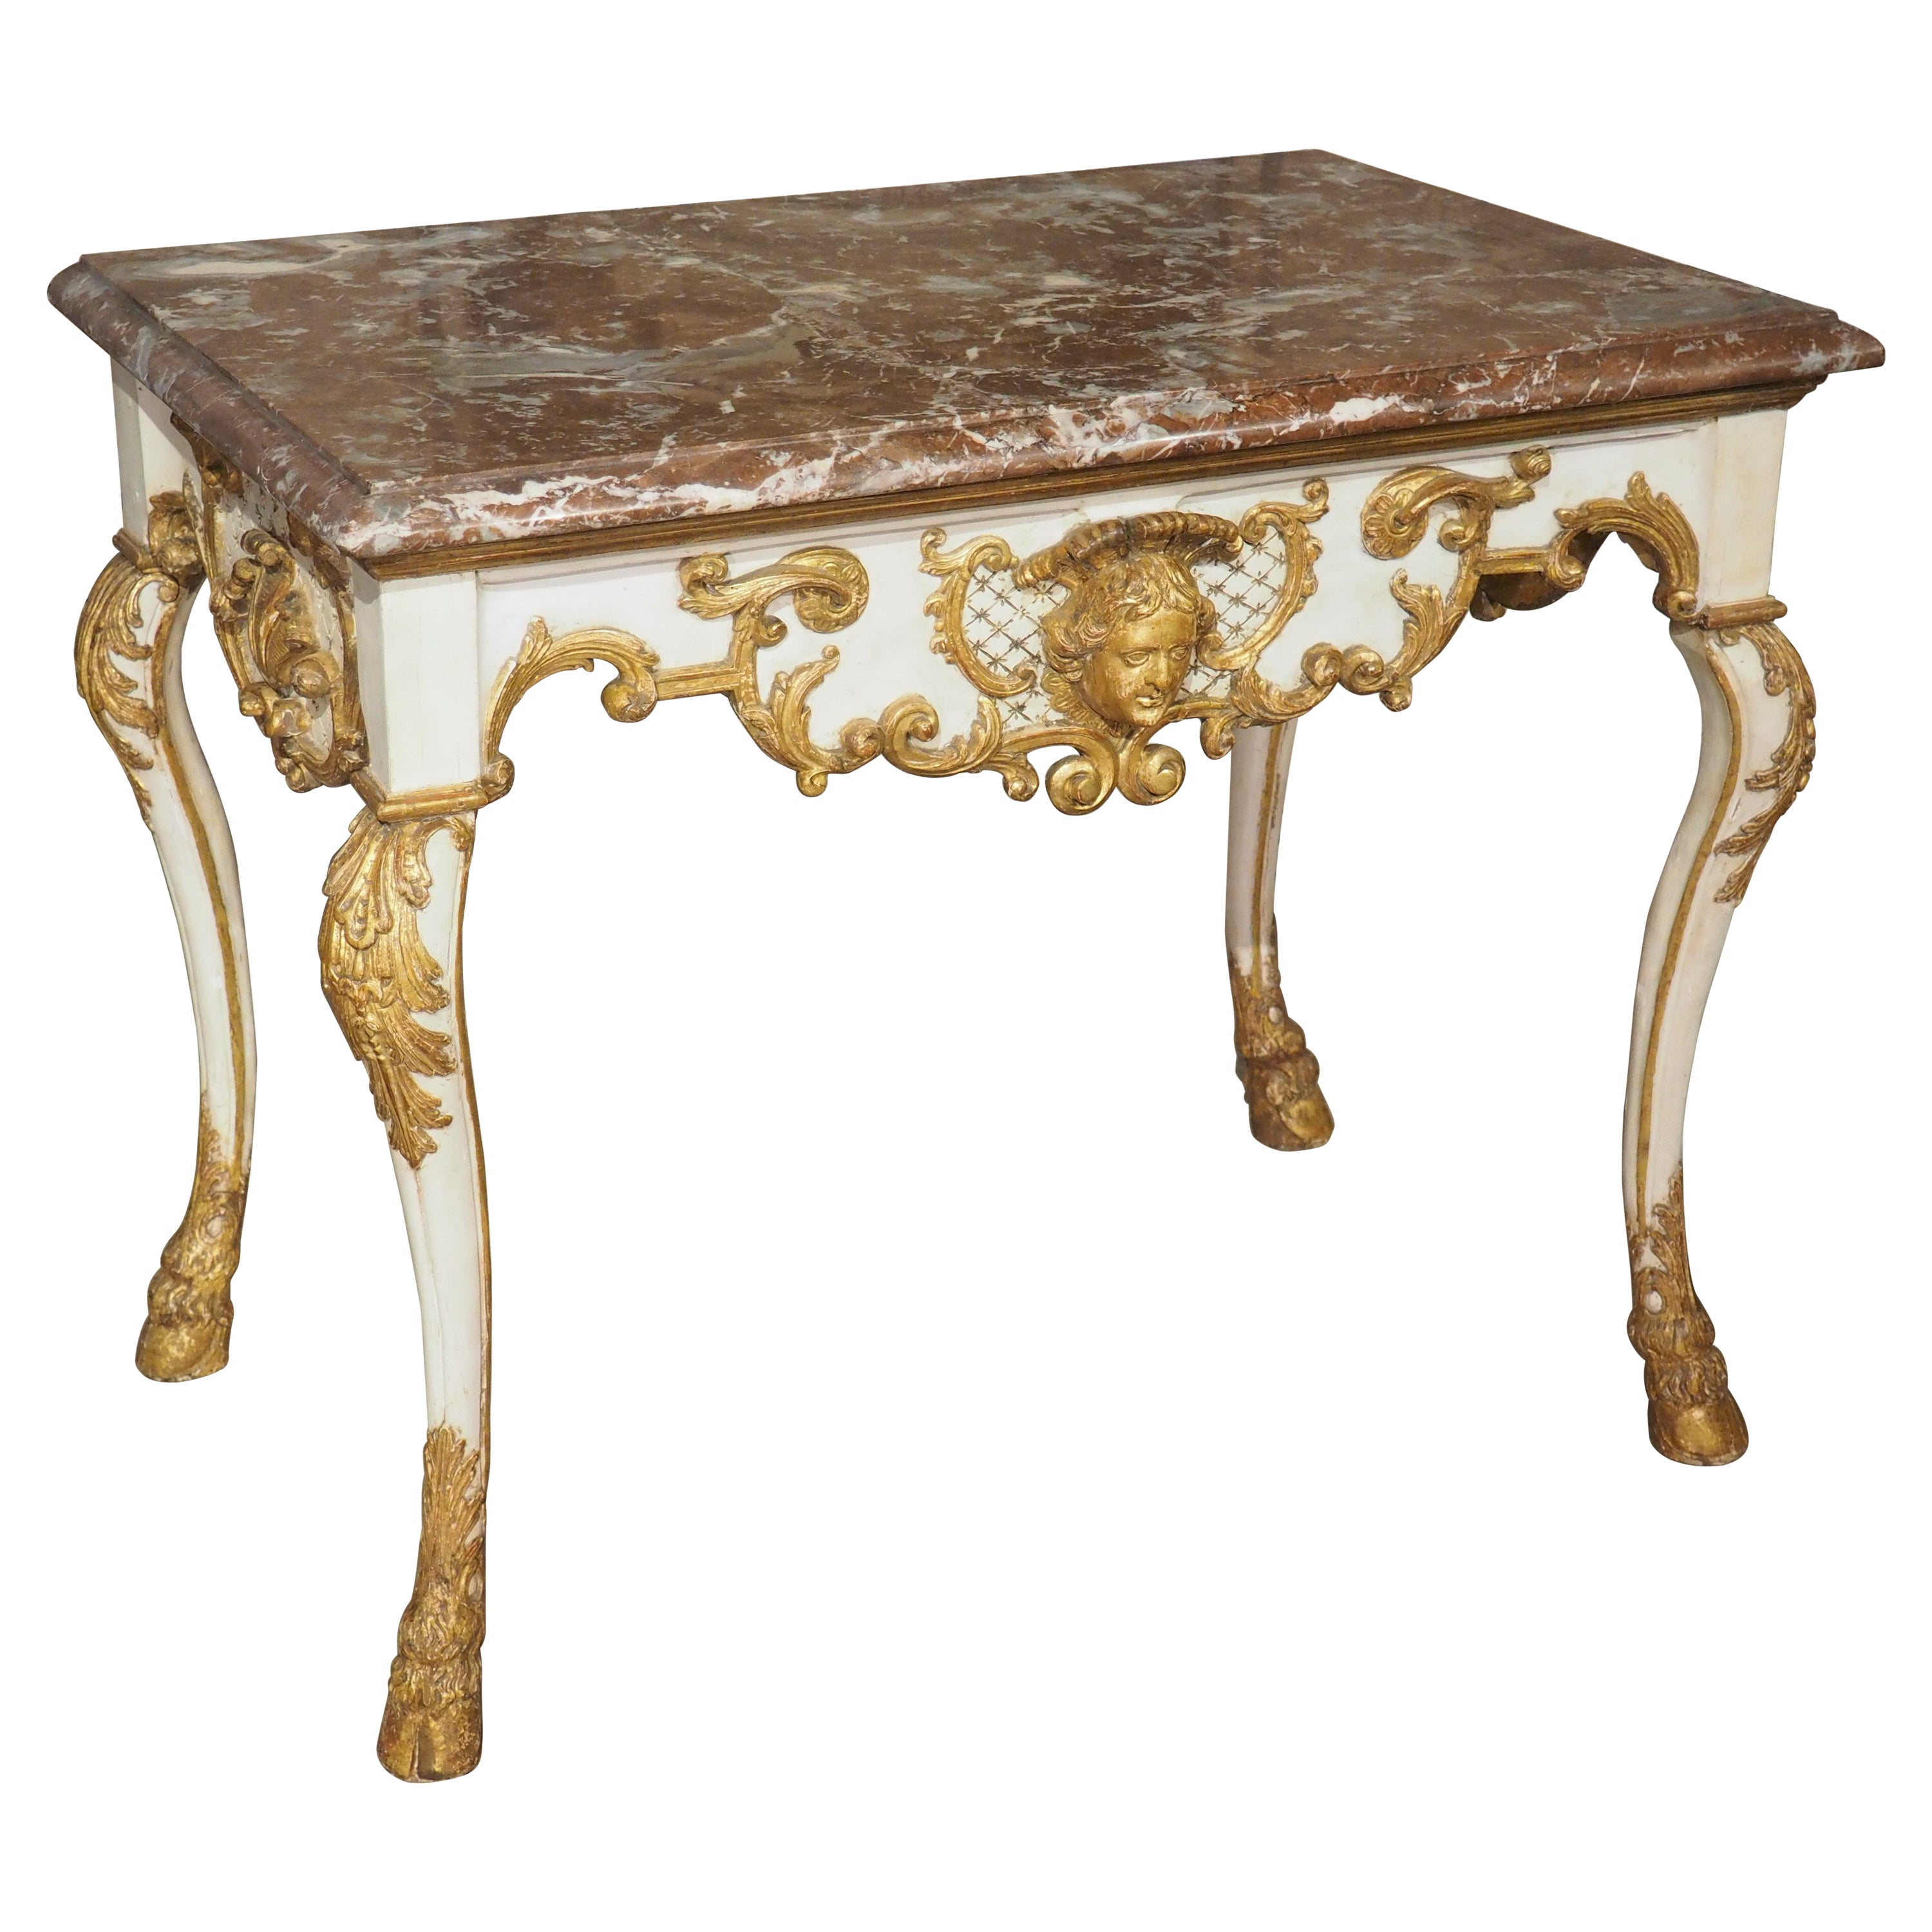 Early 18th Century Painted Italian Console Table with Rouge Royal Marble Top